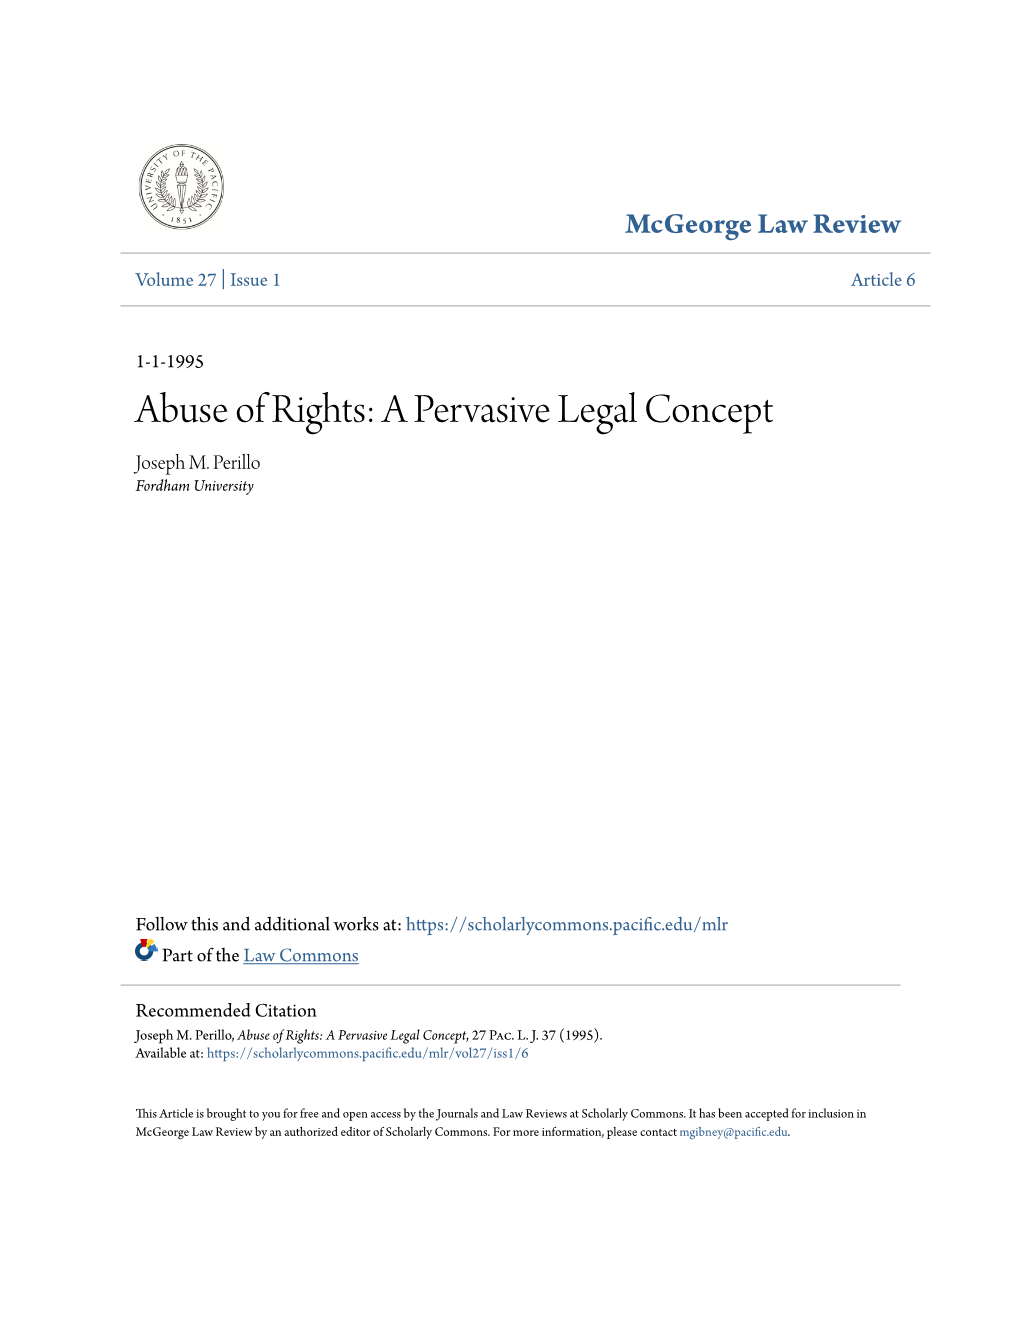 Abuse of Rights: a Pervasive Legal Concept Joseph M